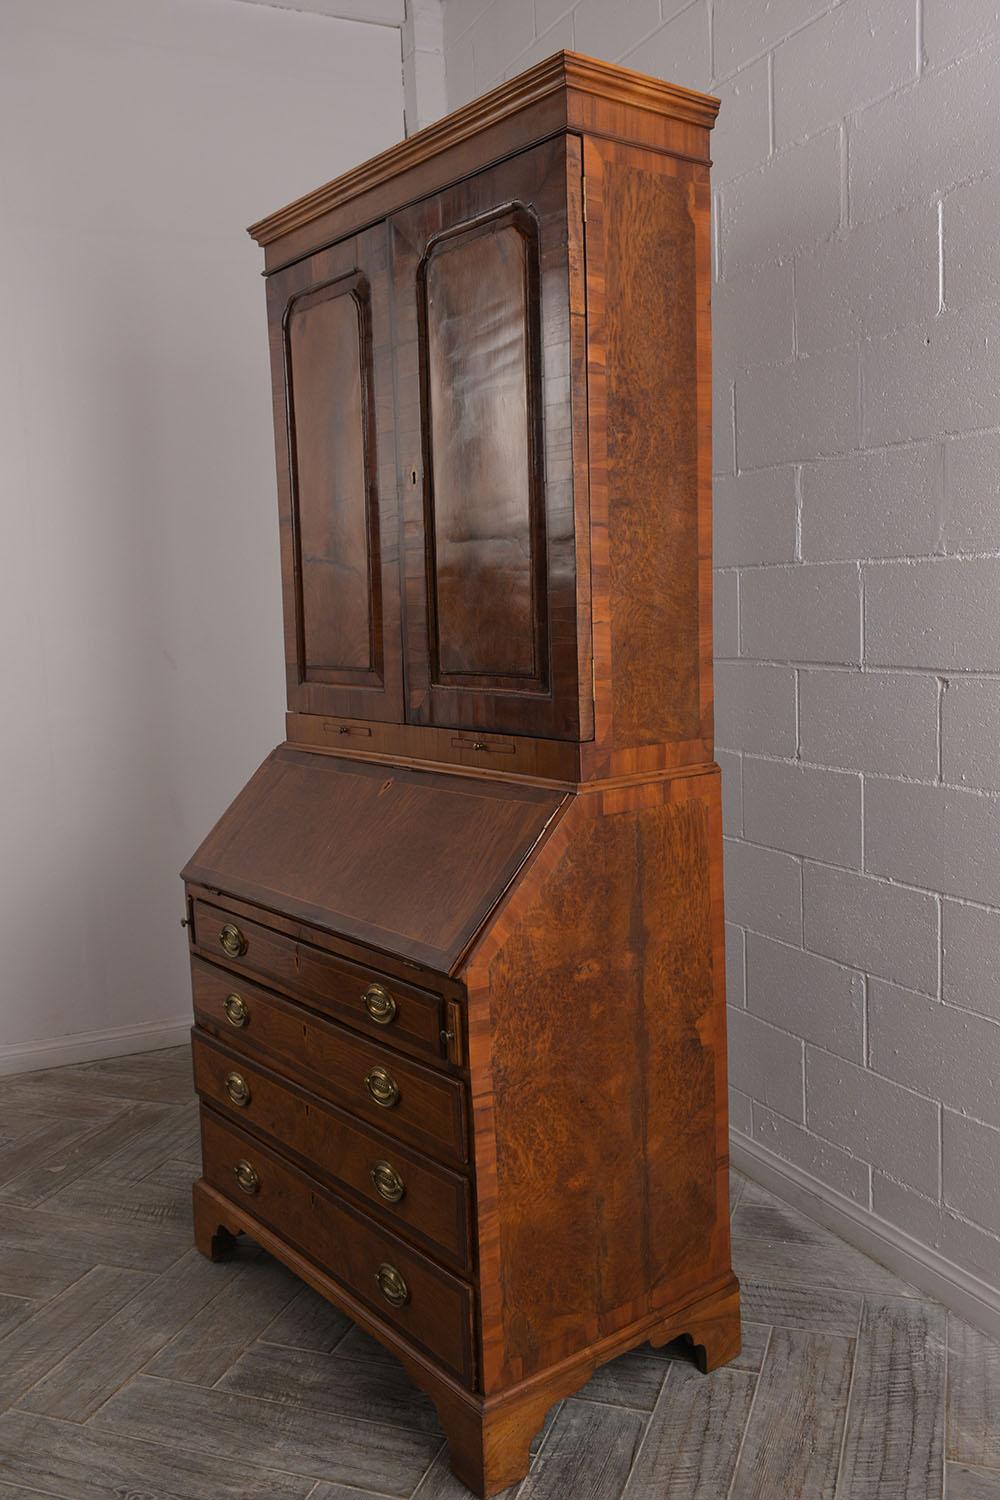 This is an English George III drop front secretaire circa the 1830s. The cabinet top features multiple open shelves small door in the middle along 3 small drawers. The drop deck door has a leather top multiple small storage spaces, drawers, and an